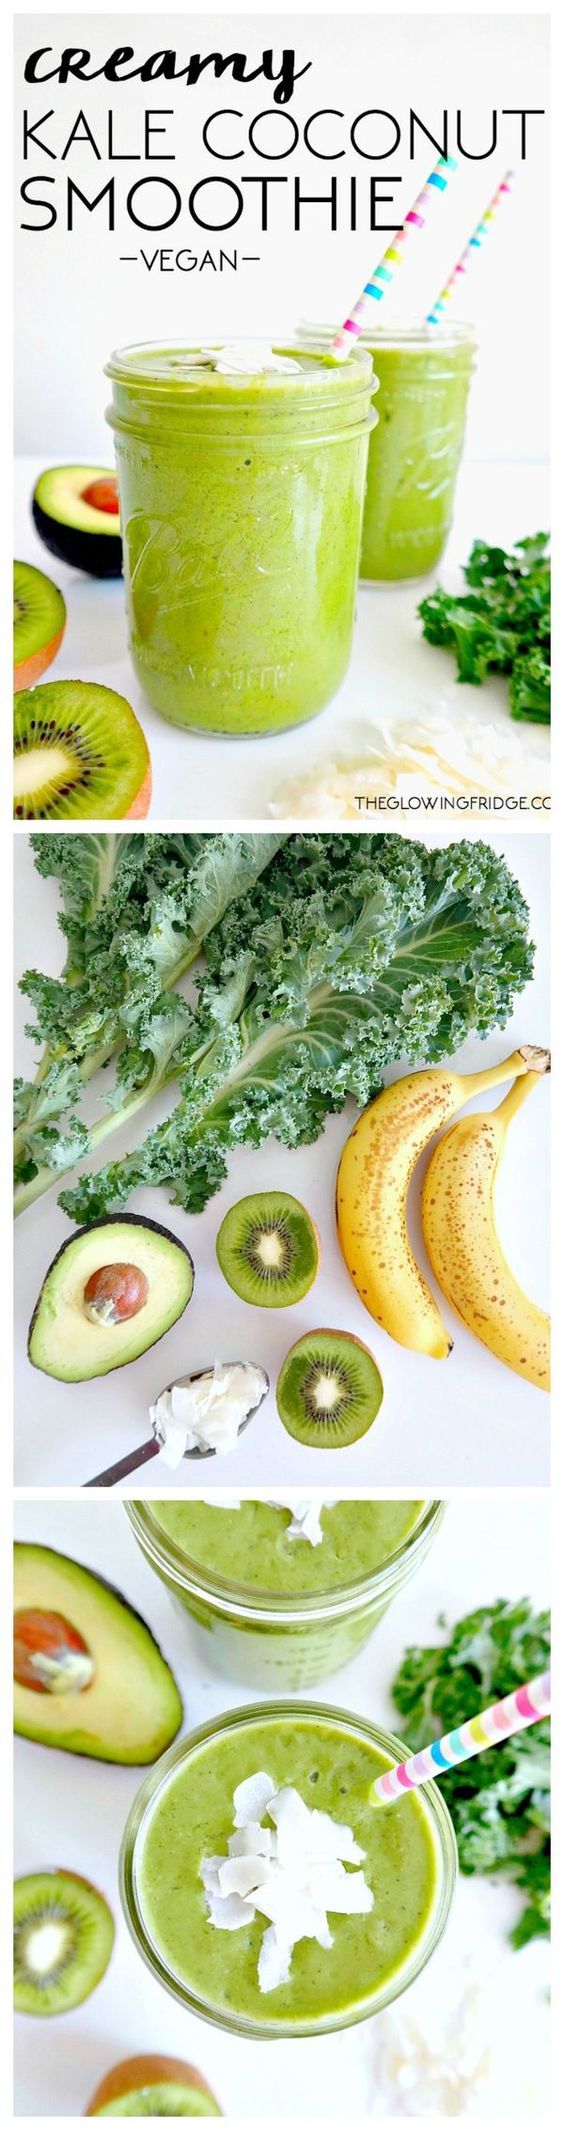 Learn how to prepare green smoothies such as this creamy kale coconut smoothie through this article. Check out this awesome post that shows you how to prepare simple green smoothie recipes. #keepingfit #weightloss #mealprep #nobake #healthyeating #healthylife #healthier #nutrition #fitnessgoals 